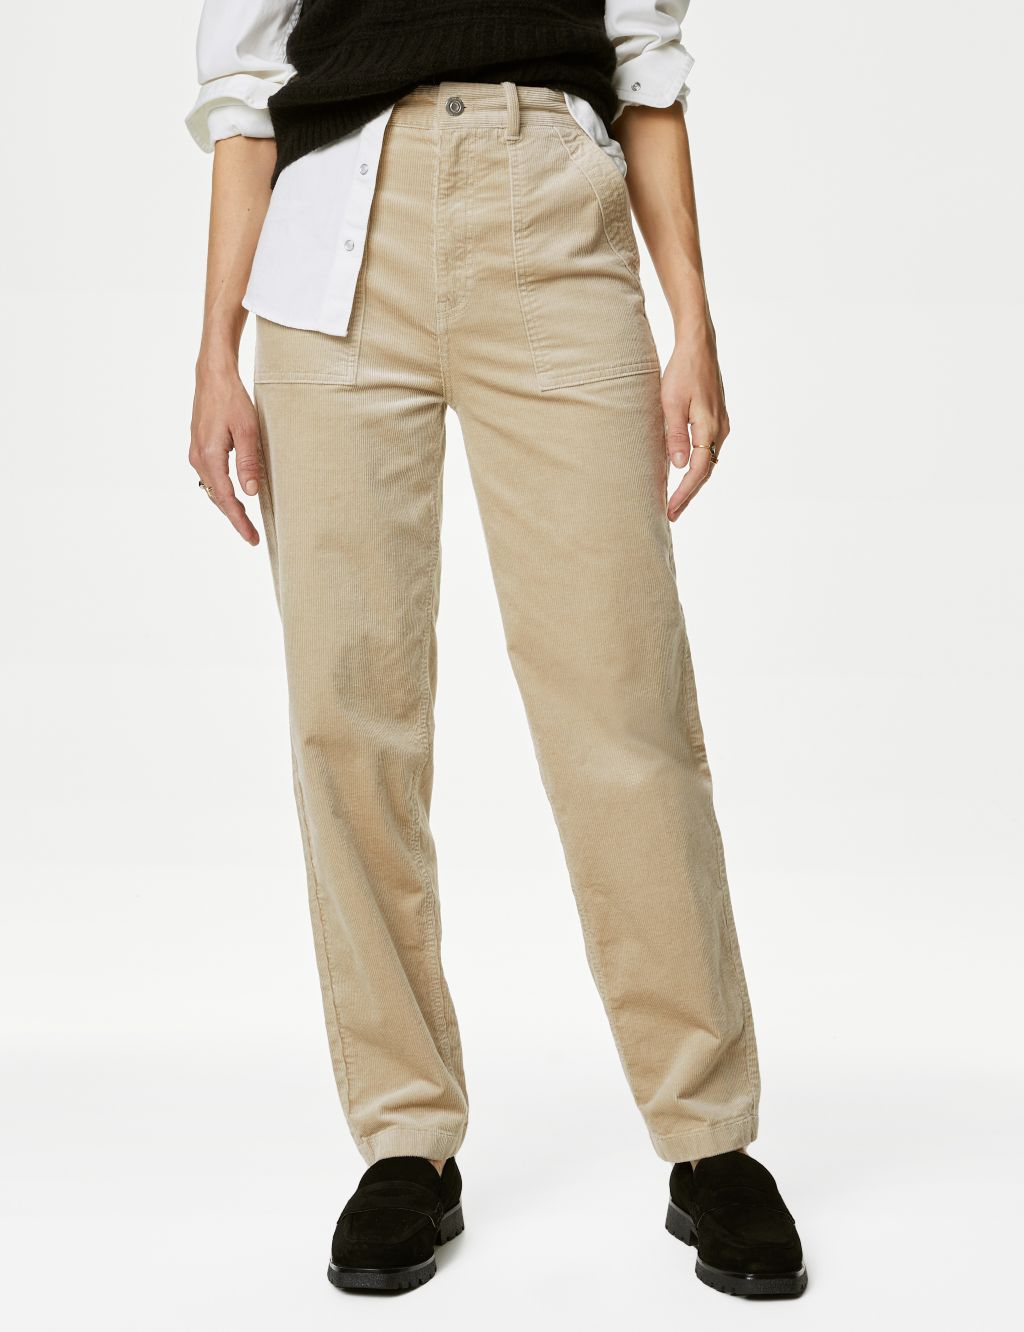 Corduroy Tapered Trousers image 3